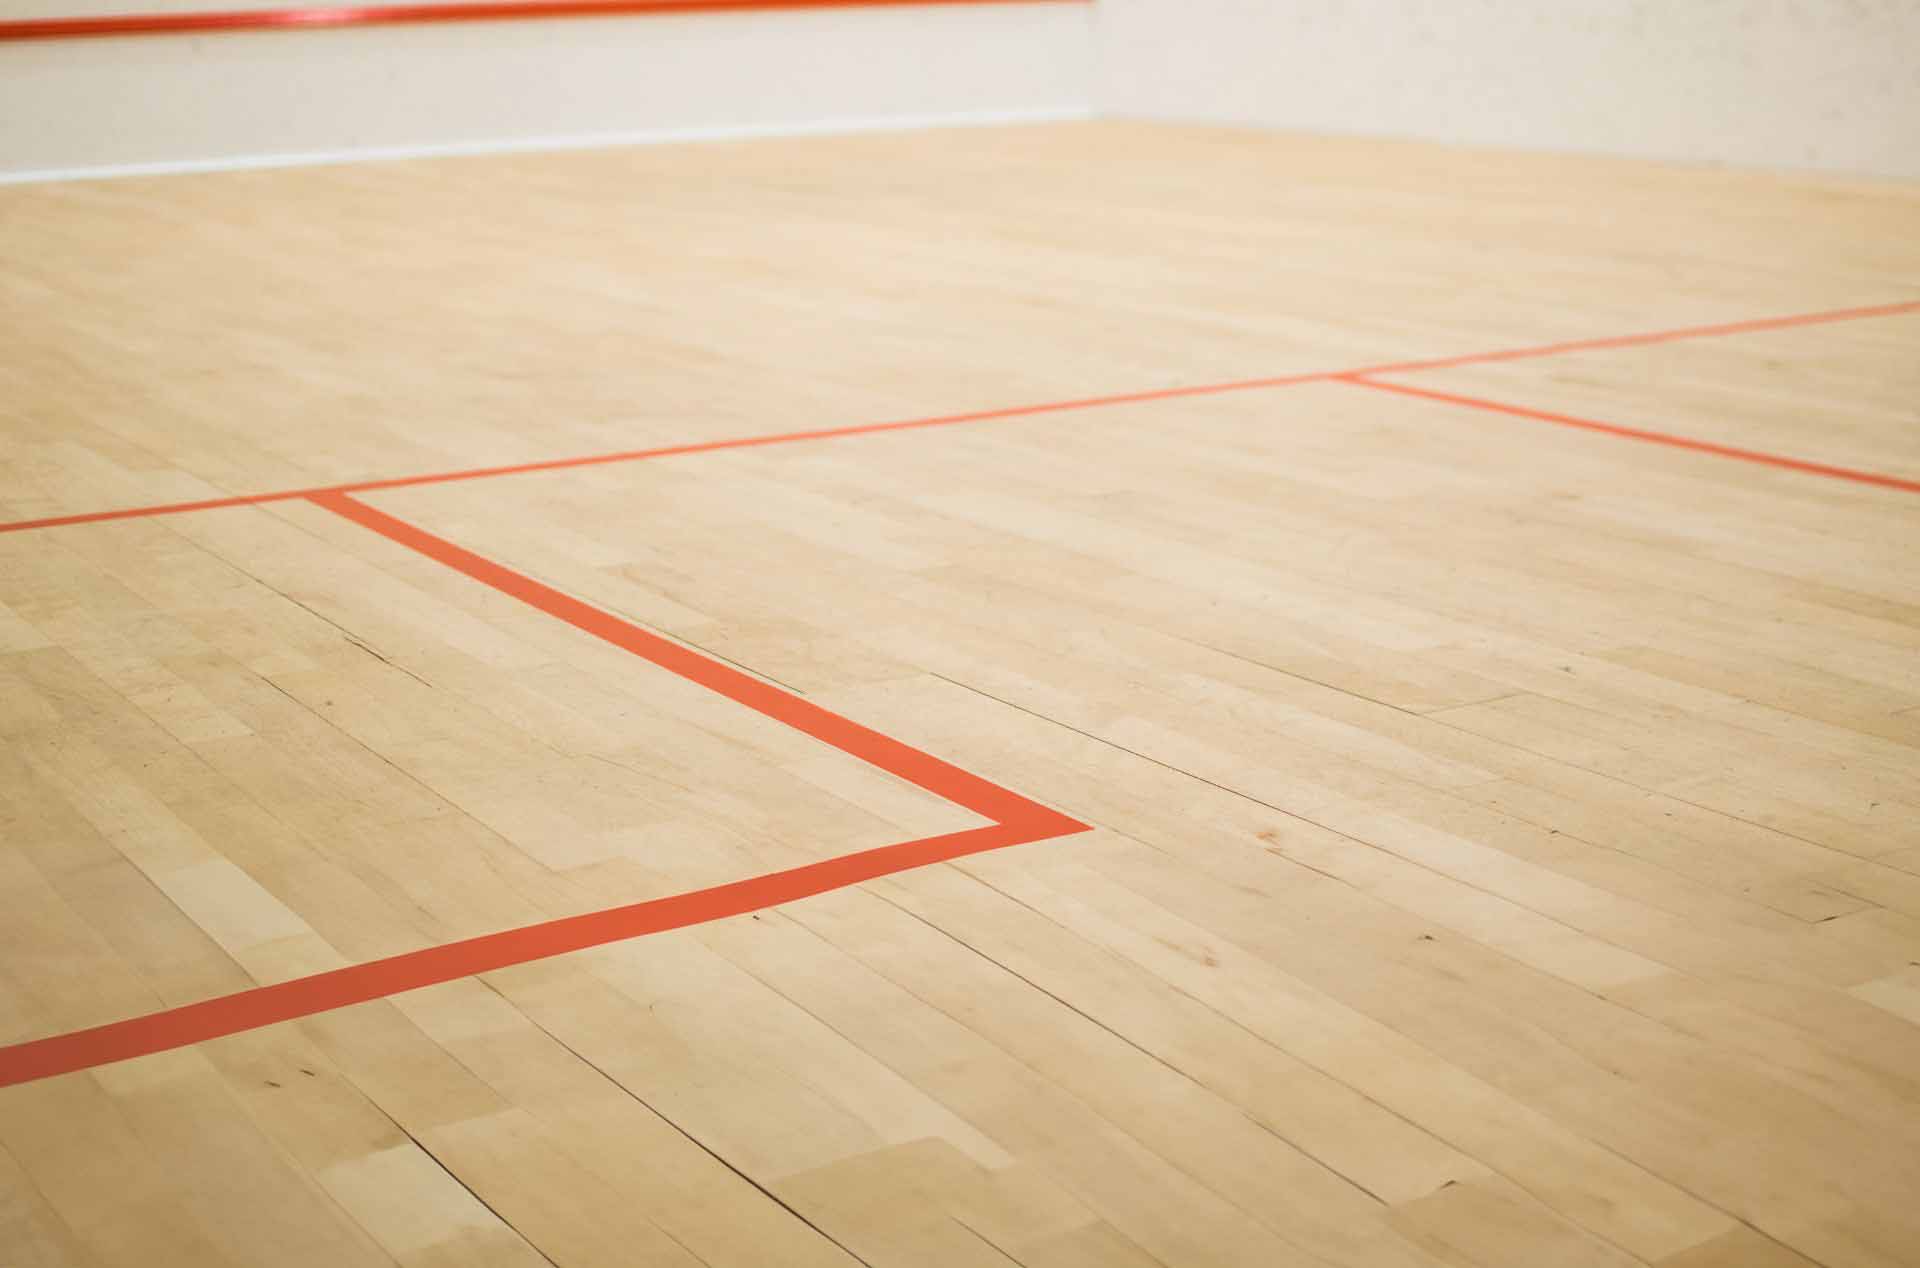 Where to Stand After Serving in Squash